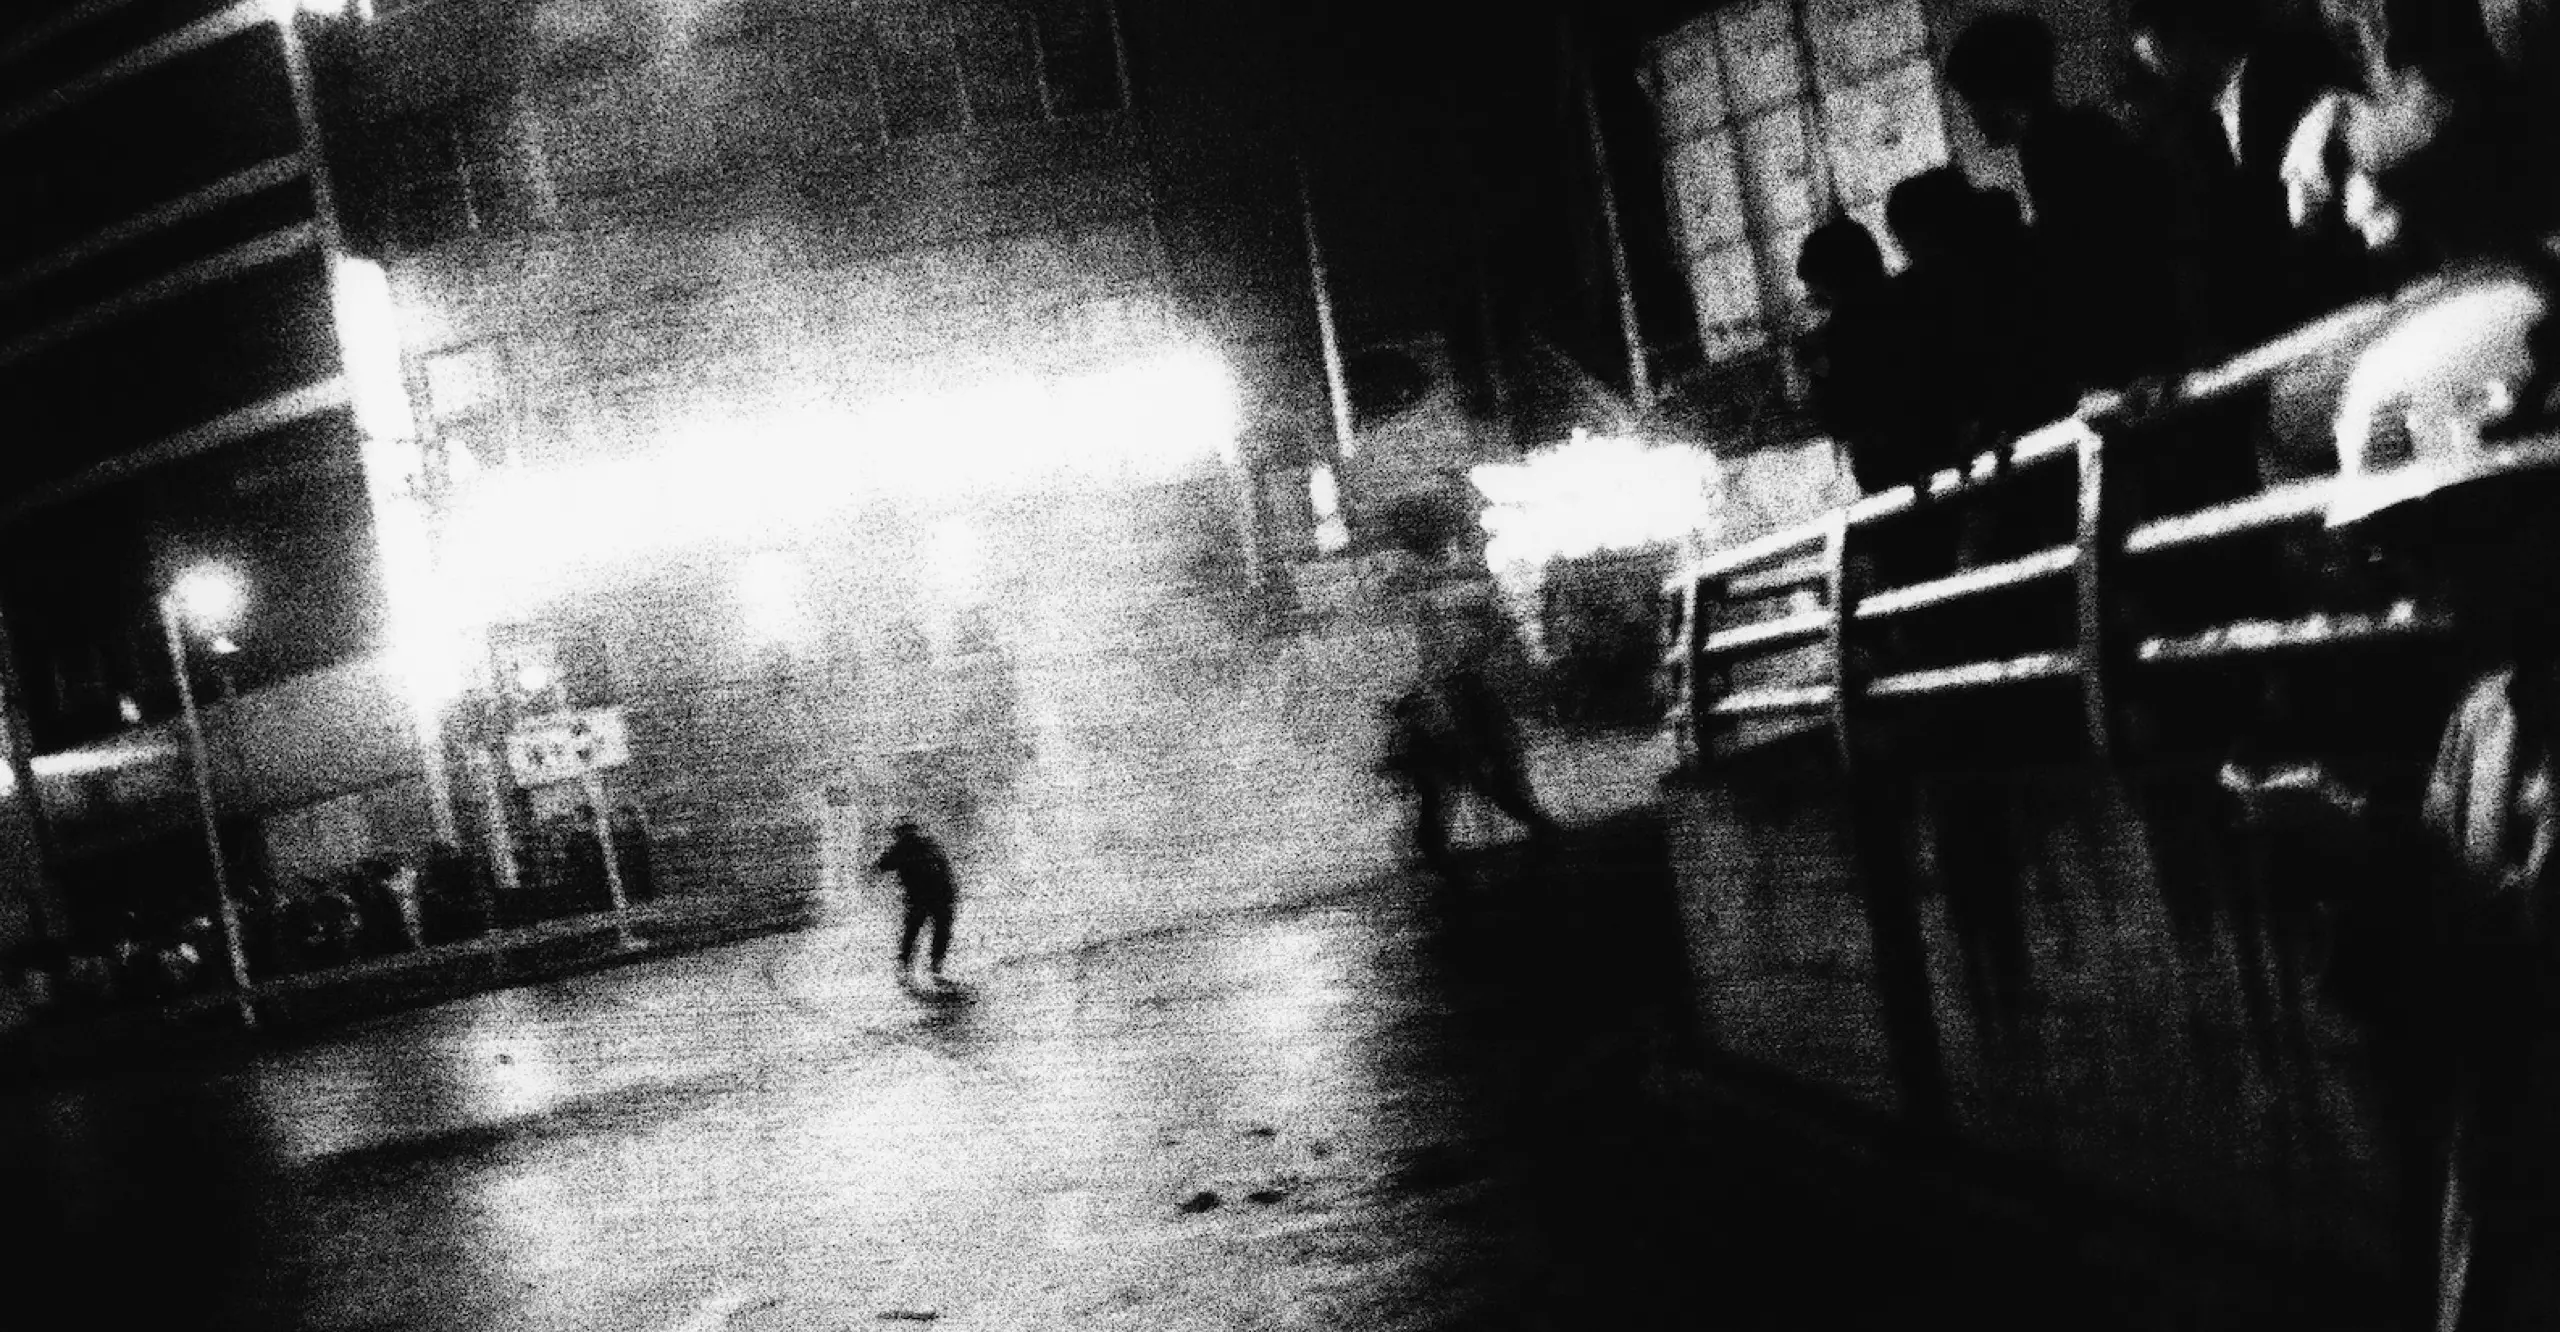 Blurred black and white image of a crowded street scene with one figure in the middle